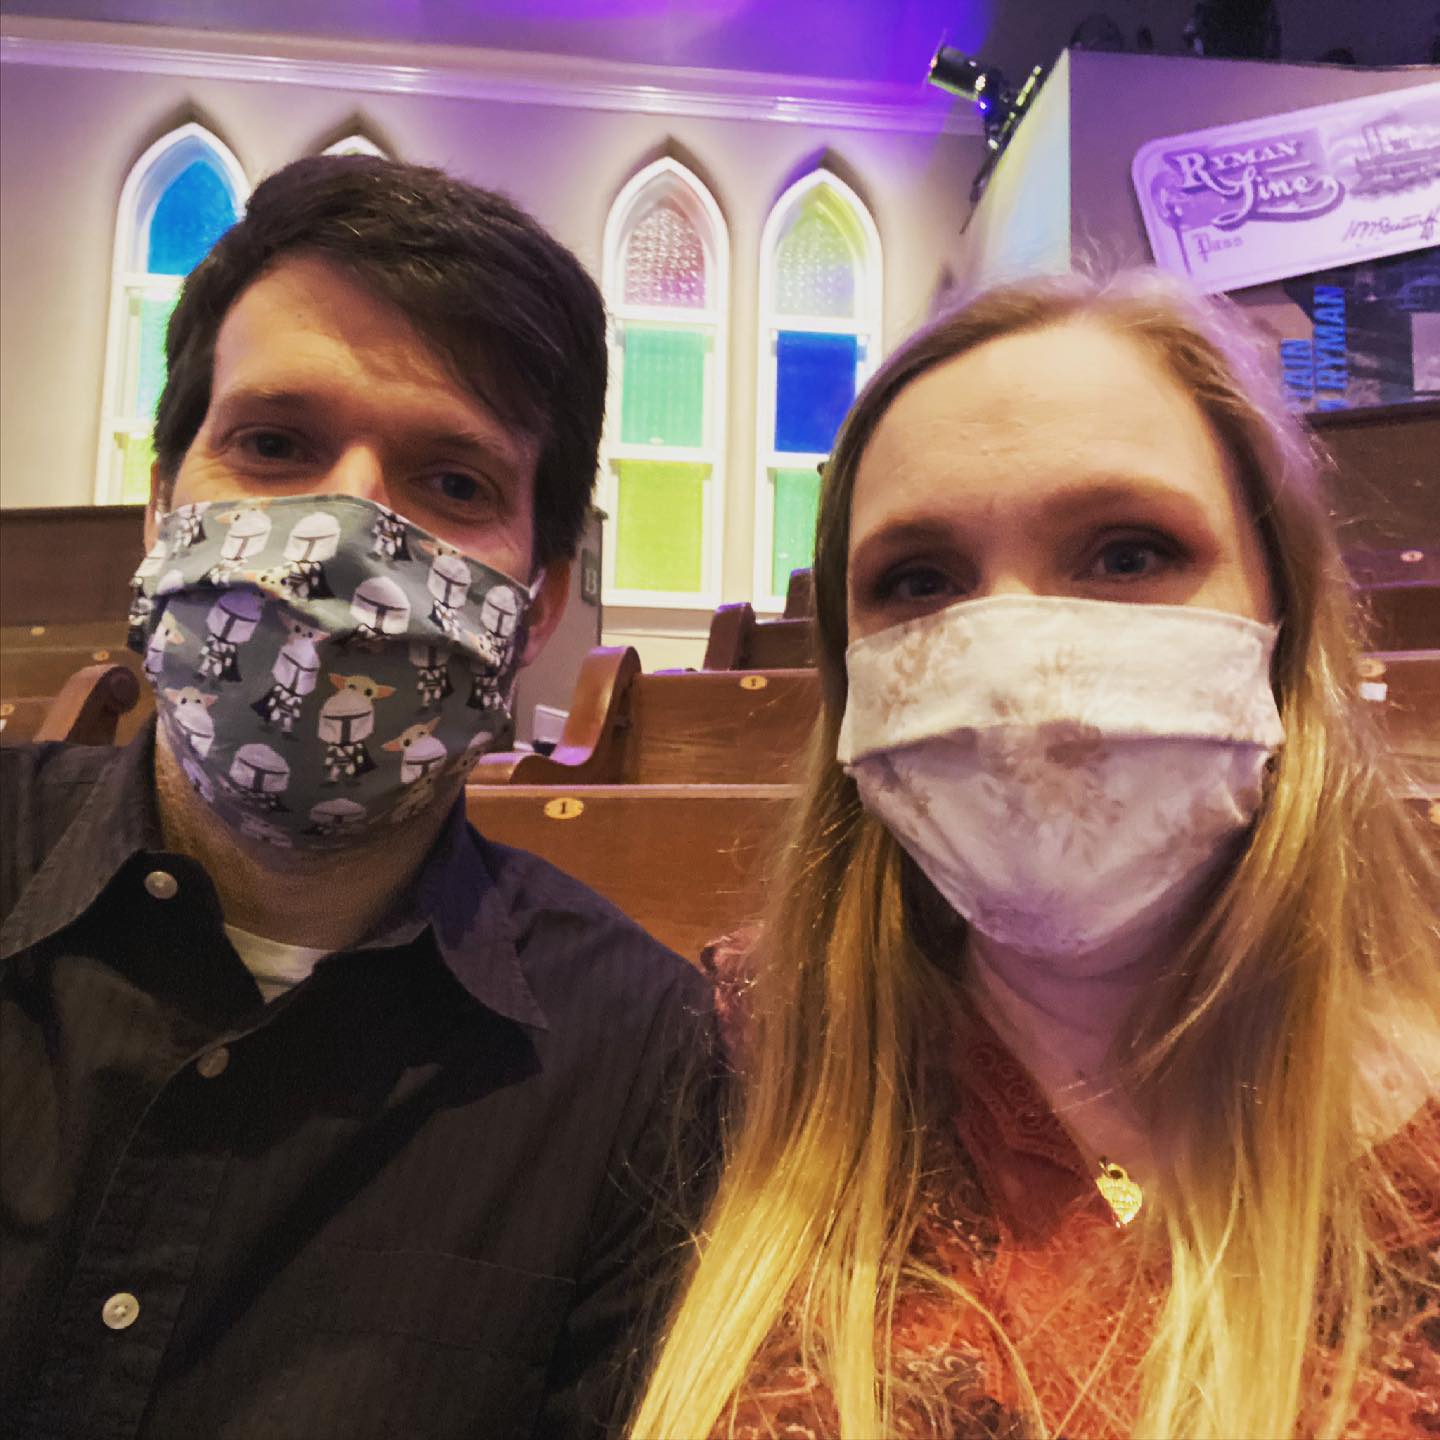 First concert in almost a year with my bride!! Seeing @drewholcombmusic and @ellieholcomb at the @theryman. Weird being here with so much open space. Still one of my favorite rooms on the planet. #music #family